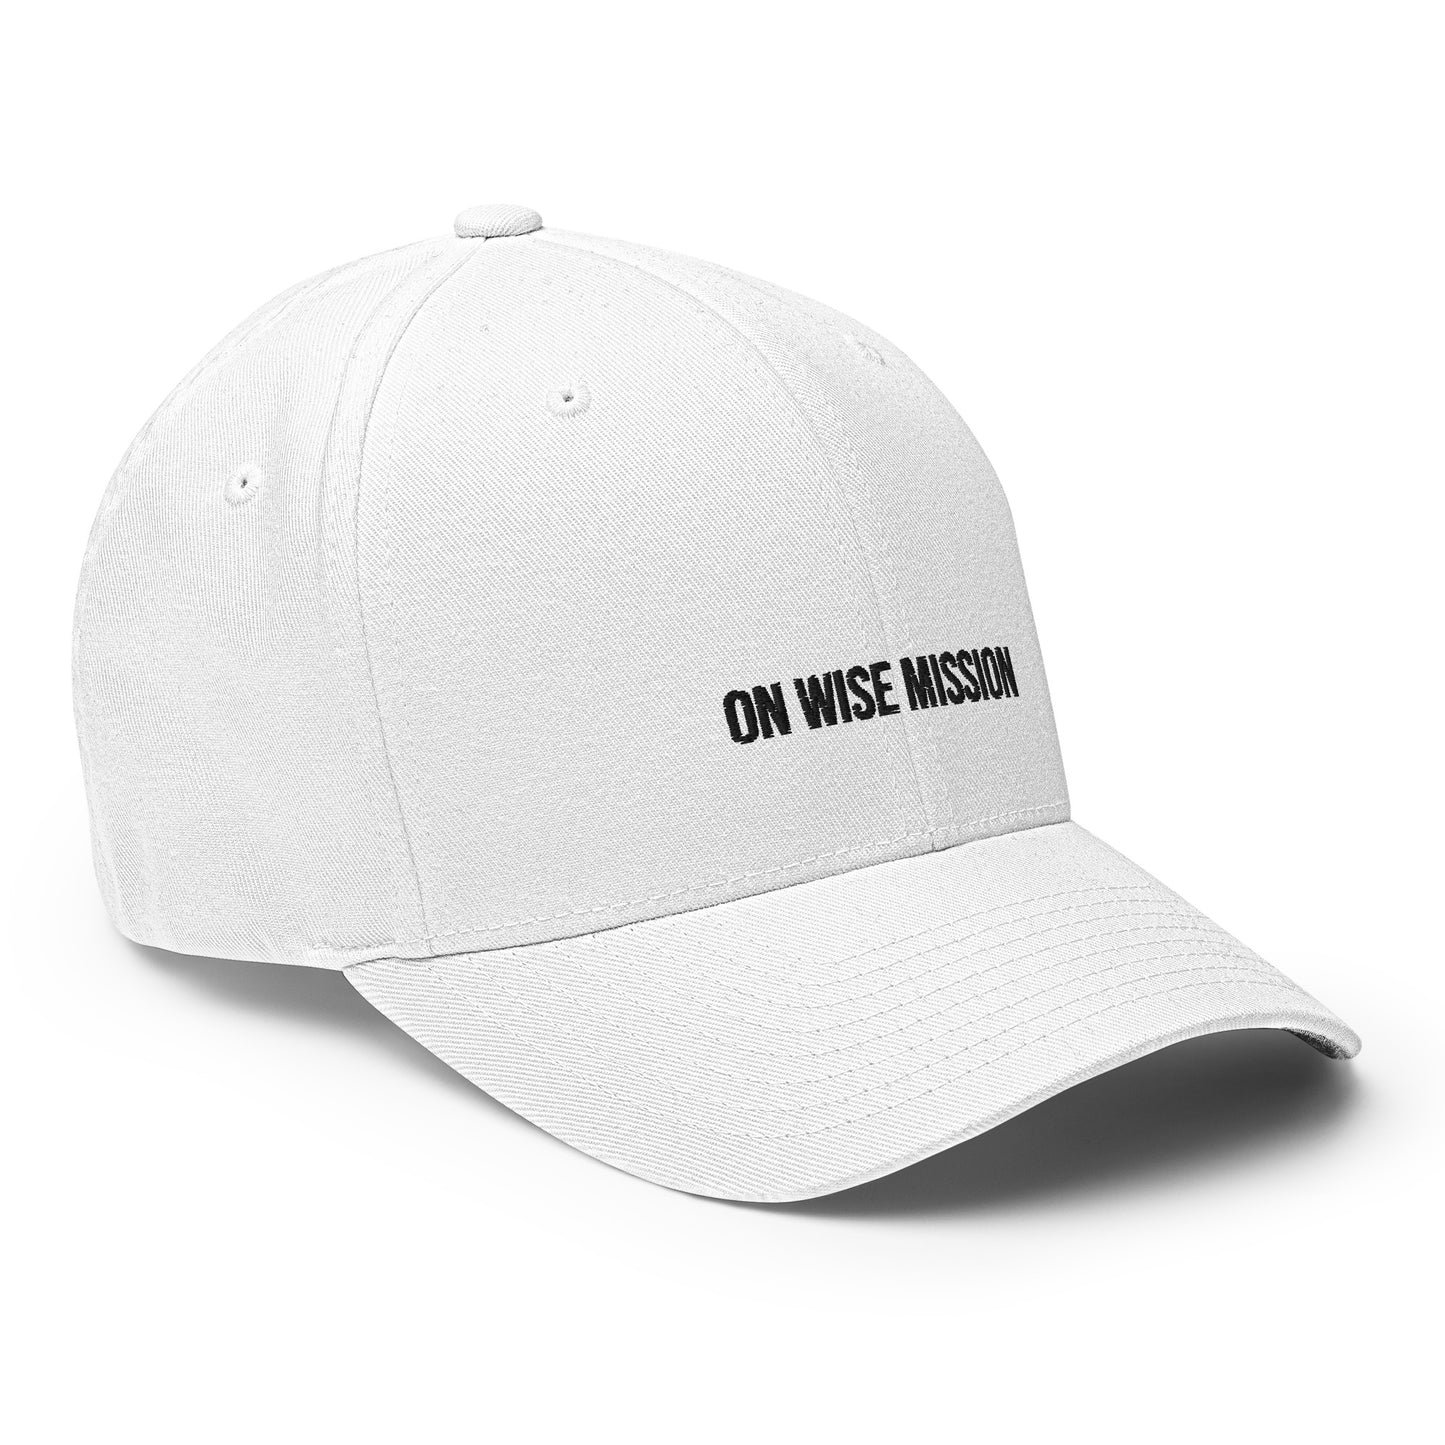 Cap "ON WISE MISSION"